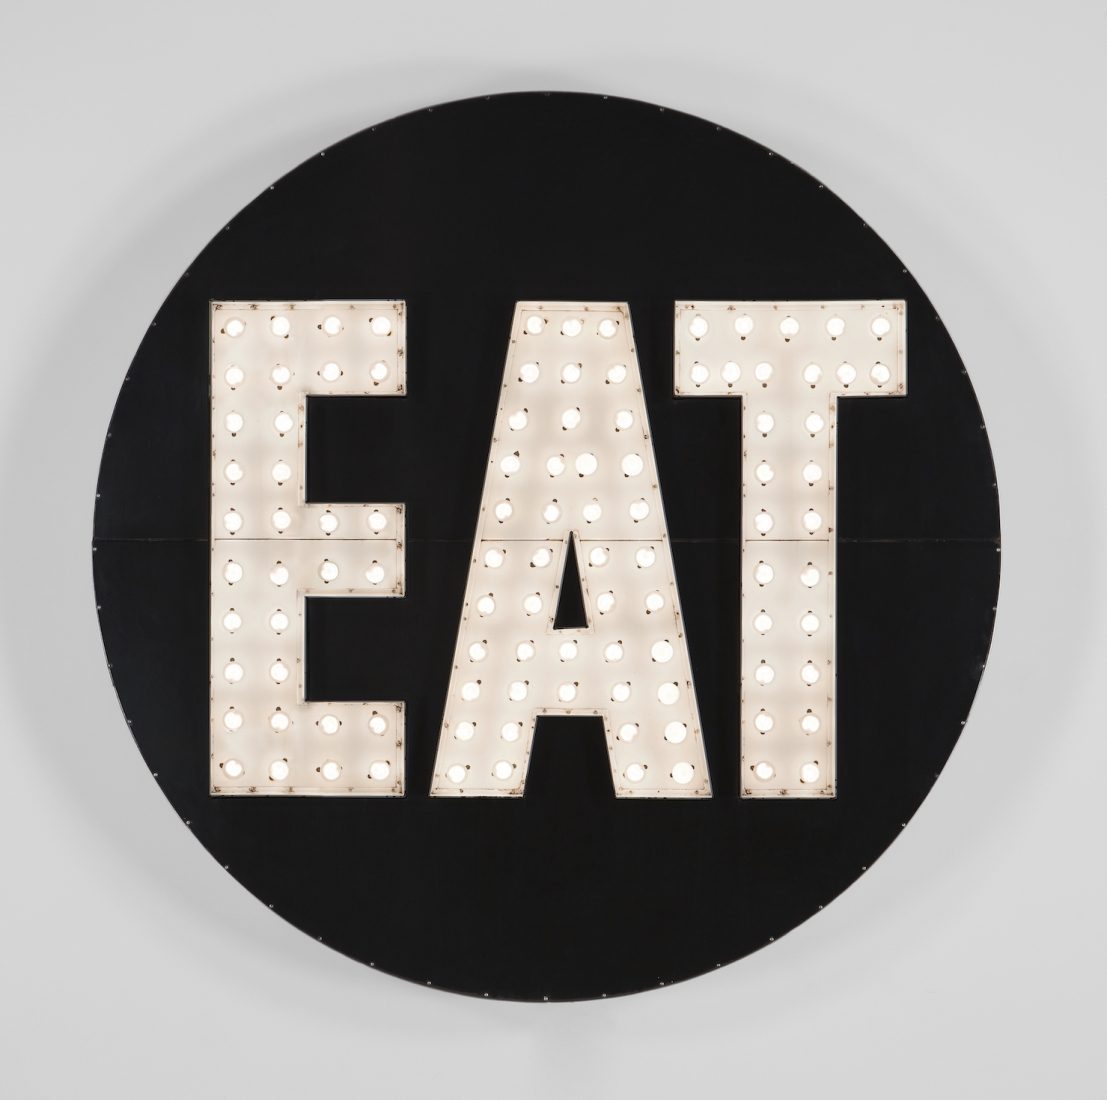 Robert Indiana's The Electric EAT sculpture, Polychrome aluminum, stainless steel, and light bulbs